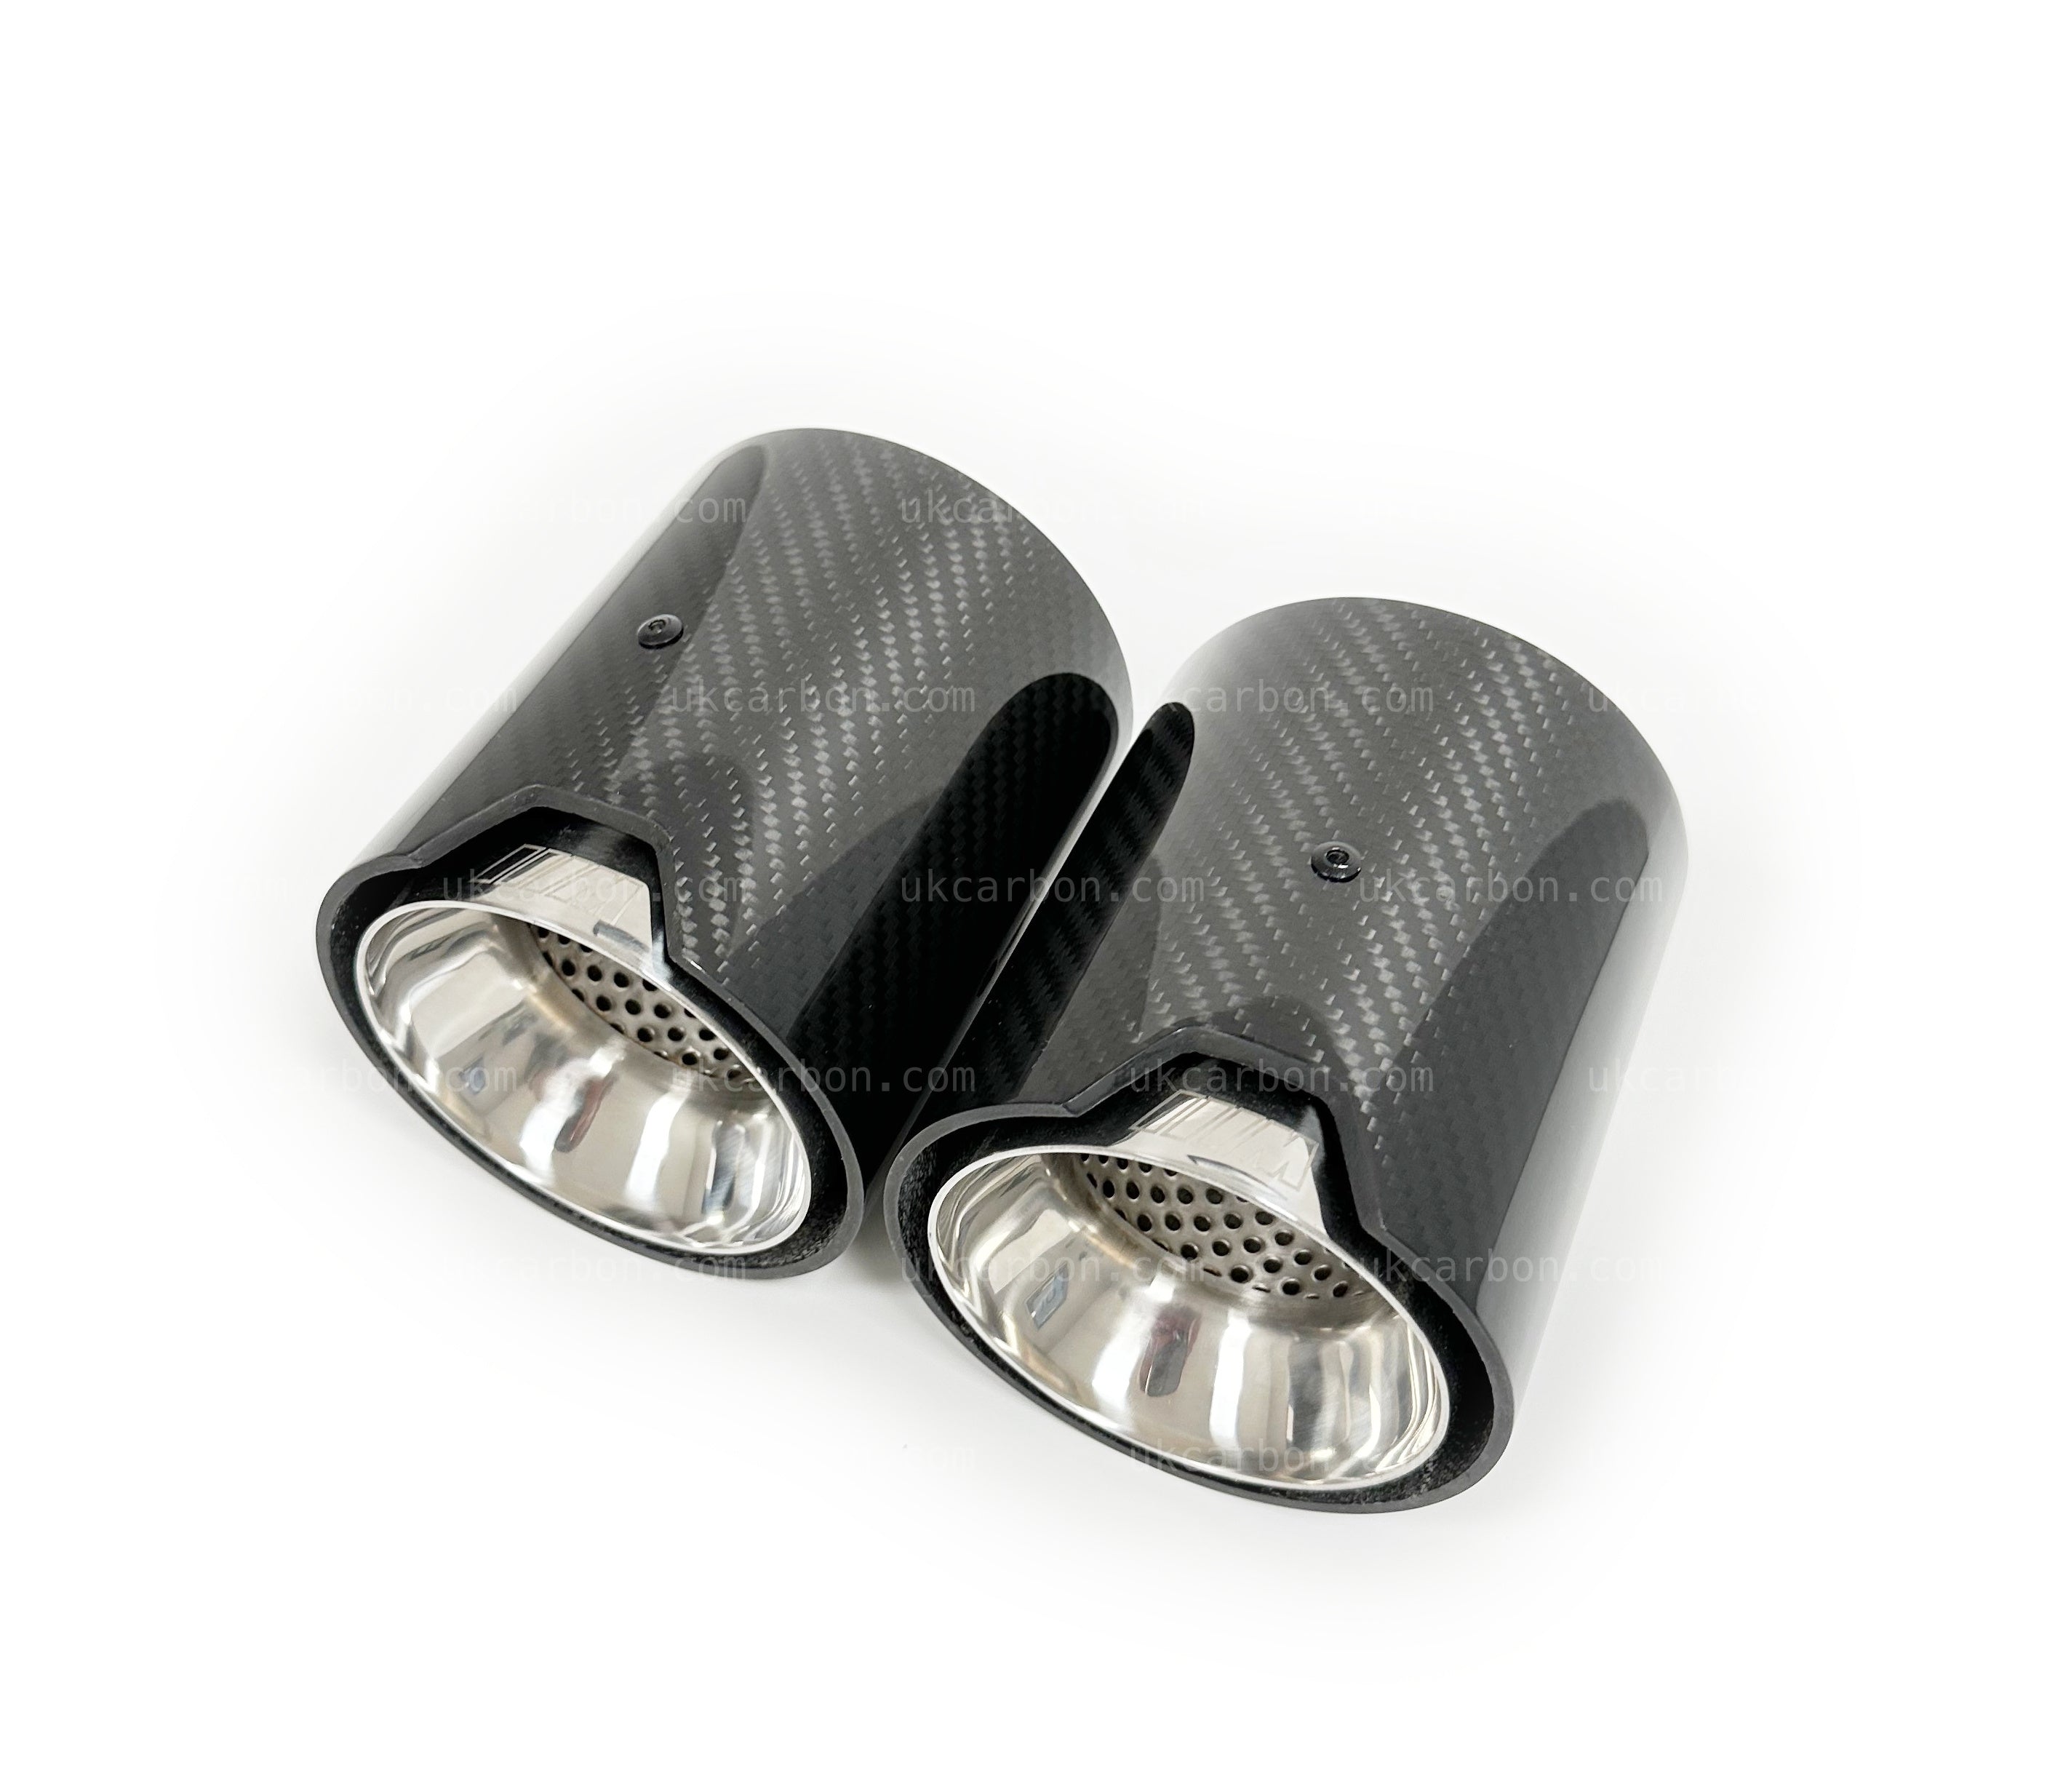 BMW M135i xDrive F40 Carbon Exhaust Tips M Performance Silver by UKCarbon